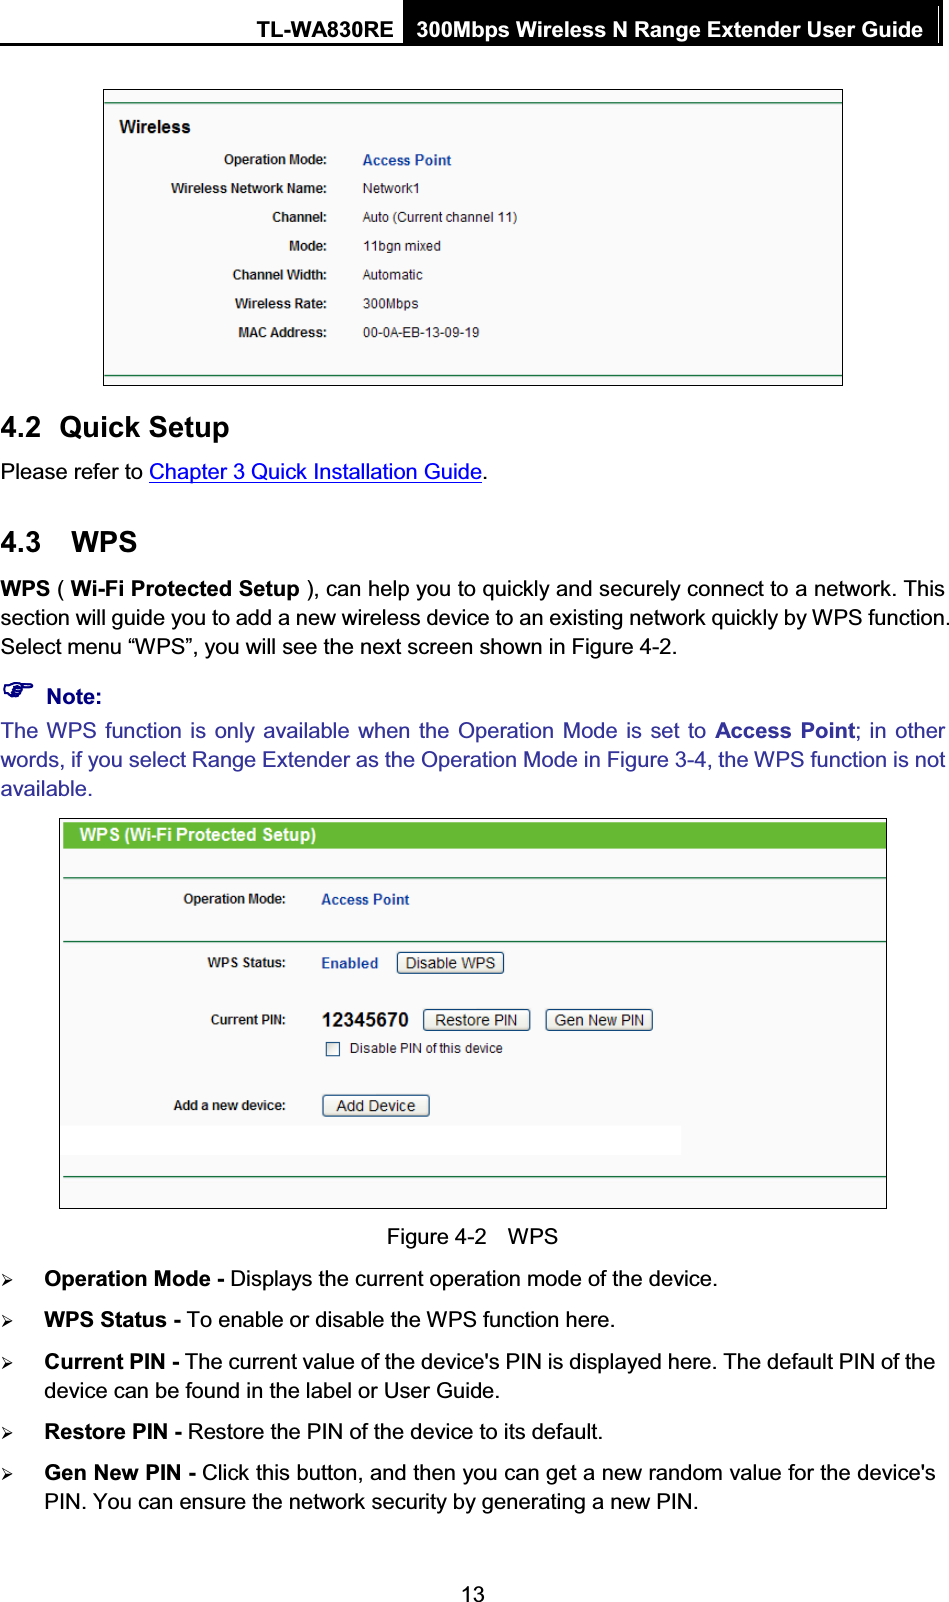 TL-WA830RE  300Mbps Wireless N Range Extender User Guide  13  4.2 Quick Setup Please refer to Chapter 3 Quick Installation Guide. 4.3 WPS  WPS ( Wi-Fi Protected Setup ), can help you to quickly and securely connect to a network. This section will guide you to add a new wireless device to an existing network quickly by WPS function. Select menu “WPS”, you will see the next screen shown in Figure 4-2.   )) Note: The WPS function is only available when the Operation Mode is set to Access Point; in other words, if you select Range Extender as the Operation Mode in Figure 3-4, the WPS function is not available.  Figure 4-2    WPS ¾ Operation Mode - Displays the current operation mode of the device. ¾ WPS Status - To enable or disable the WPS function here.   ¾ Current PIN - The current value of the device&apos;s PIN is displayed here. The default PIN of the device can be found in the label or User Guide.   ¾ Restore PIN - Restore the PIN of the device to its default.   ¾ Gen New PIN - Click this button, and then you can get a new random value for the device&apos;s PIN. You can ensure the network security by generating a new PIN.   